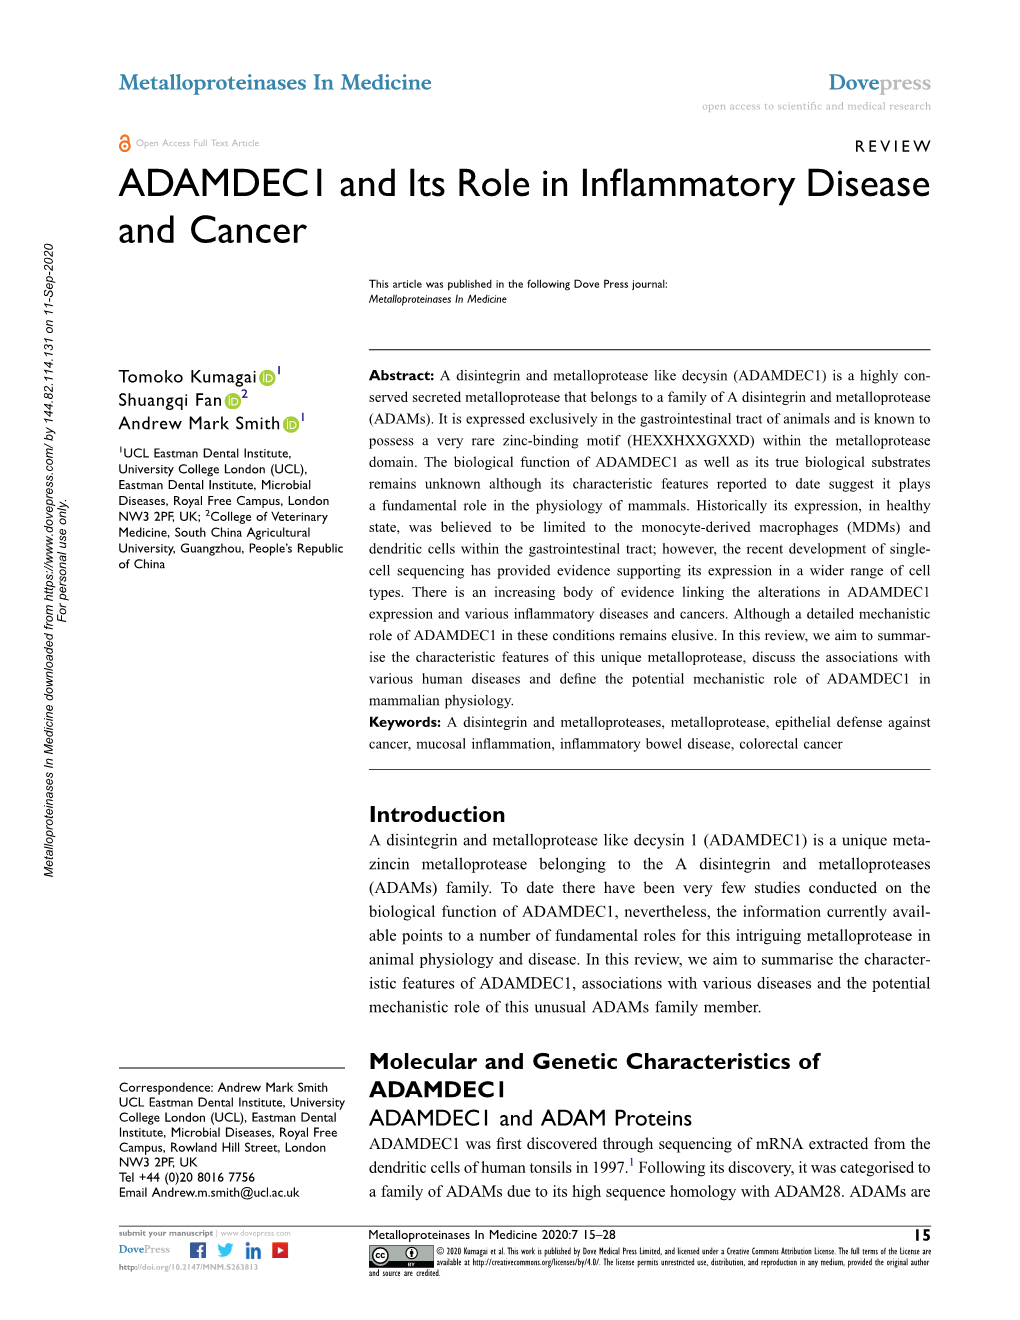 ADAMDEC1 and Its Role in Inflammatory Disease and Cancer